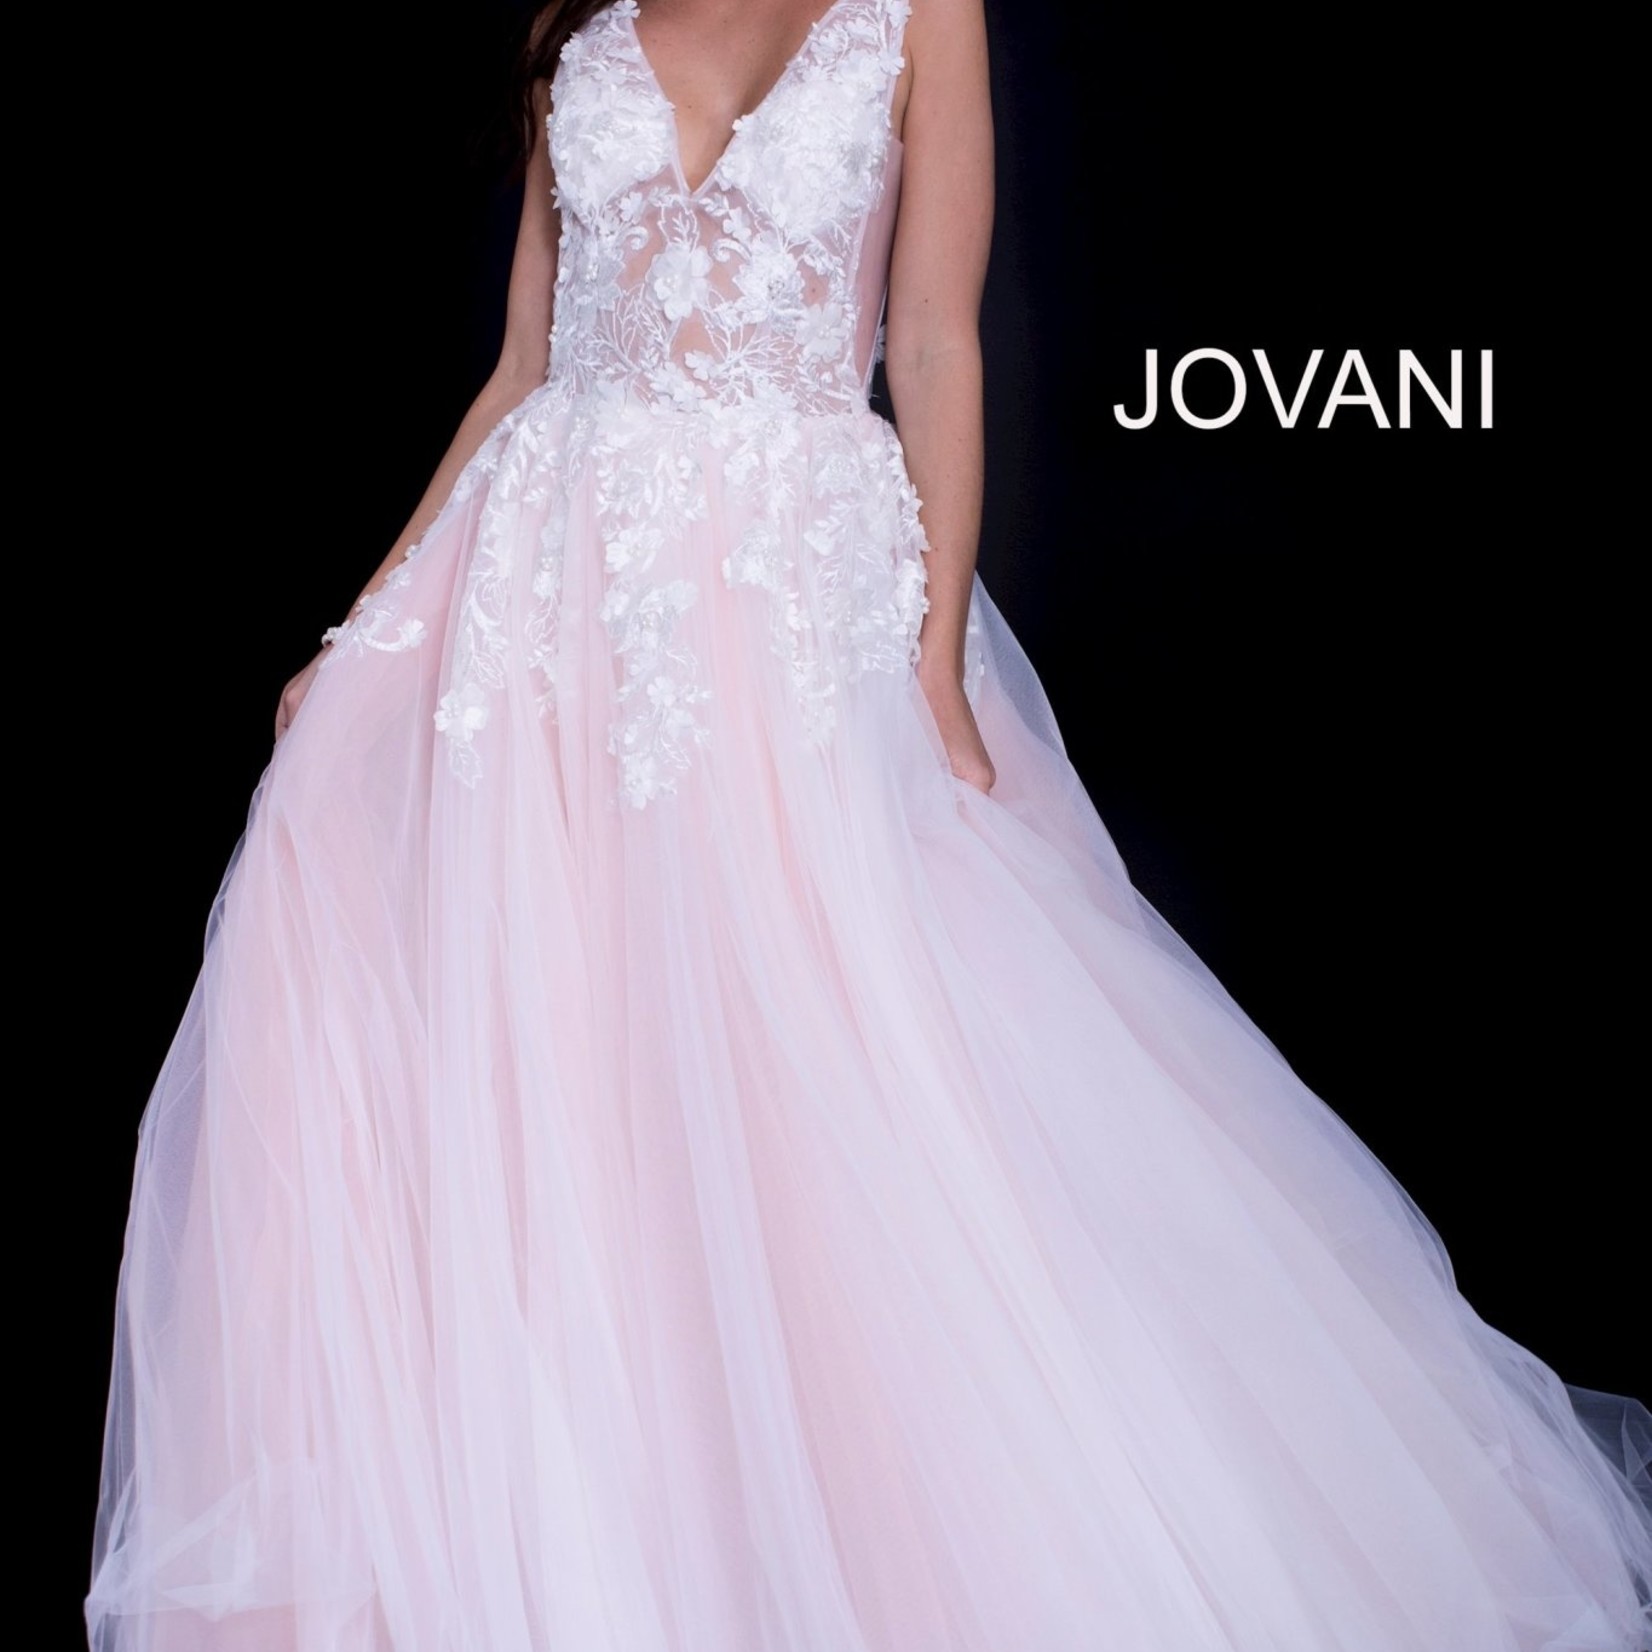 Jovani 55634A Multi Layer Flowered Ball Gown